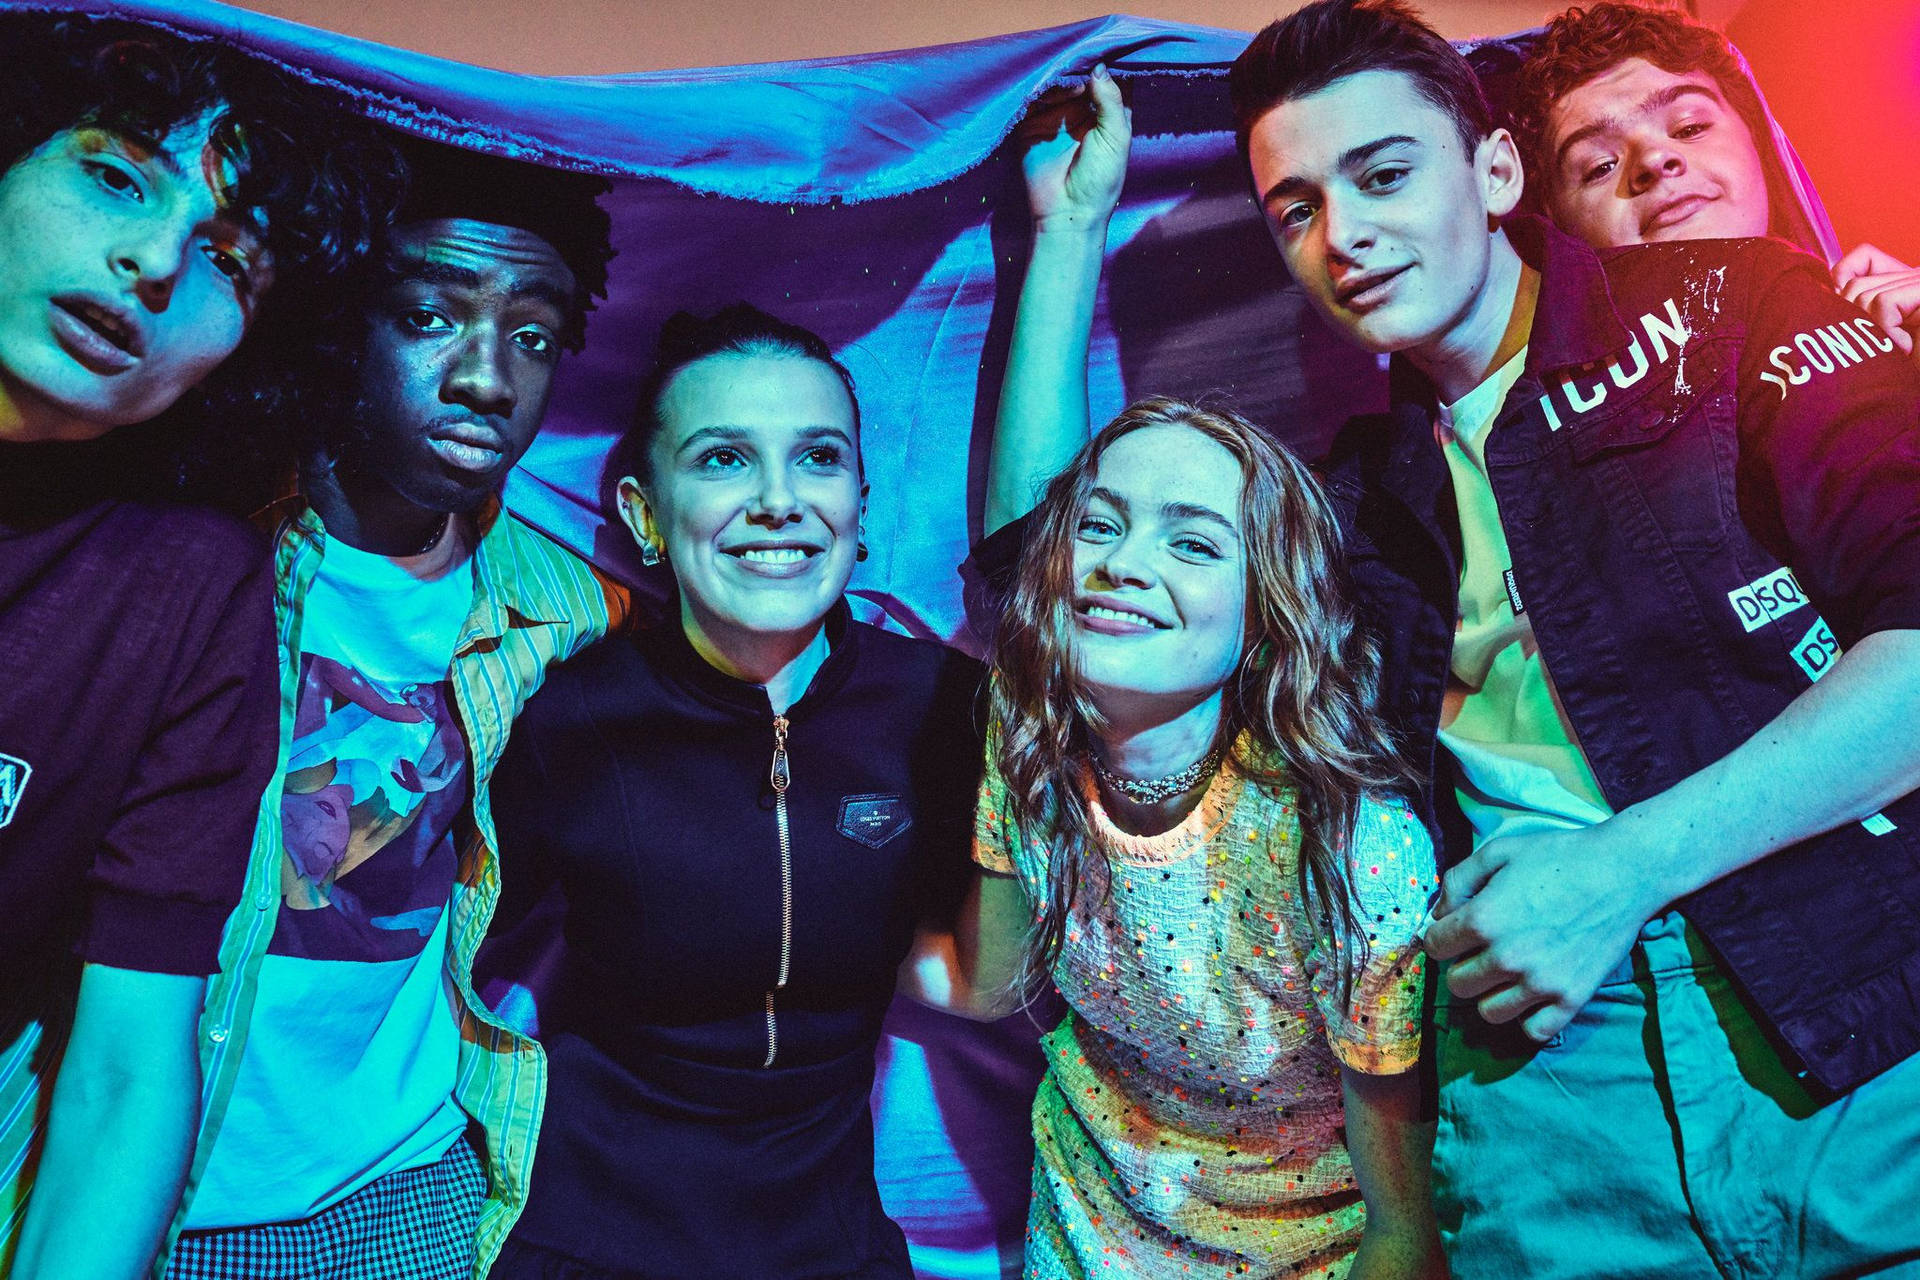 Sadie Sink With The Other Cast Wallpaper